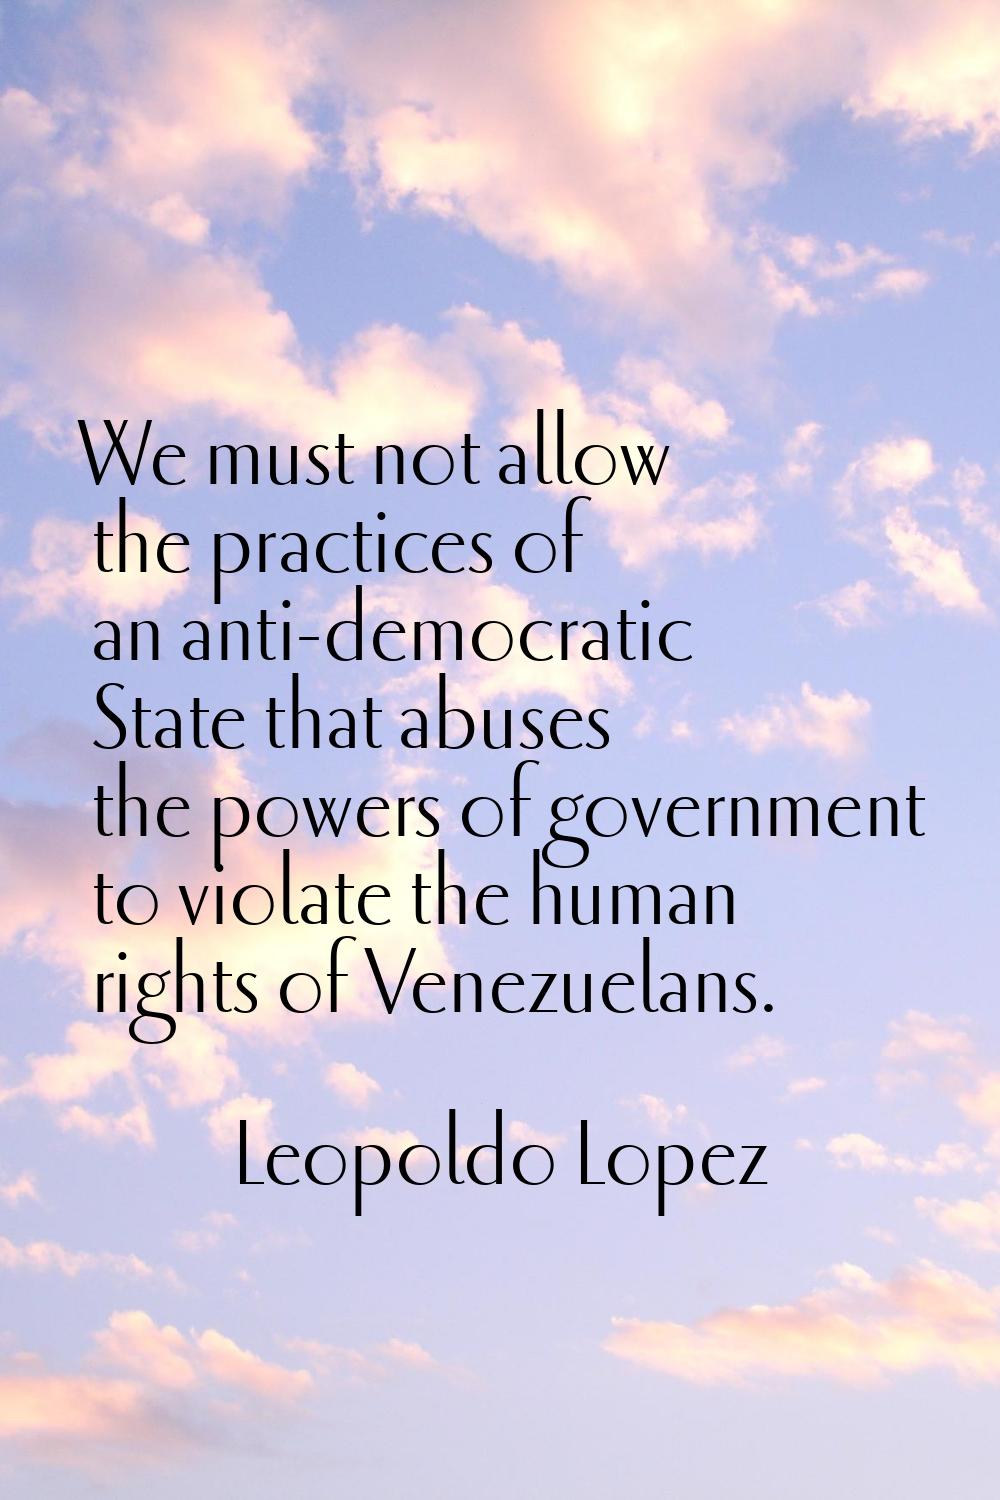 We must not allow the practices of an anti-democratic State that abuses the powers of government to